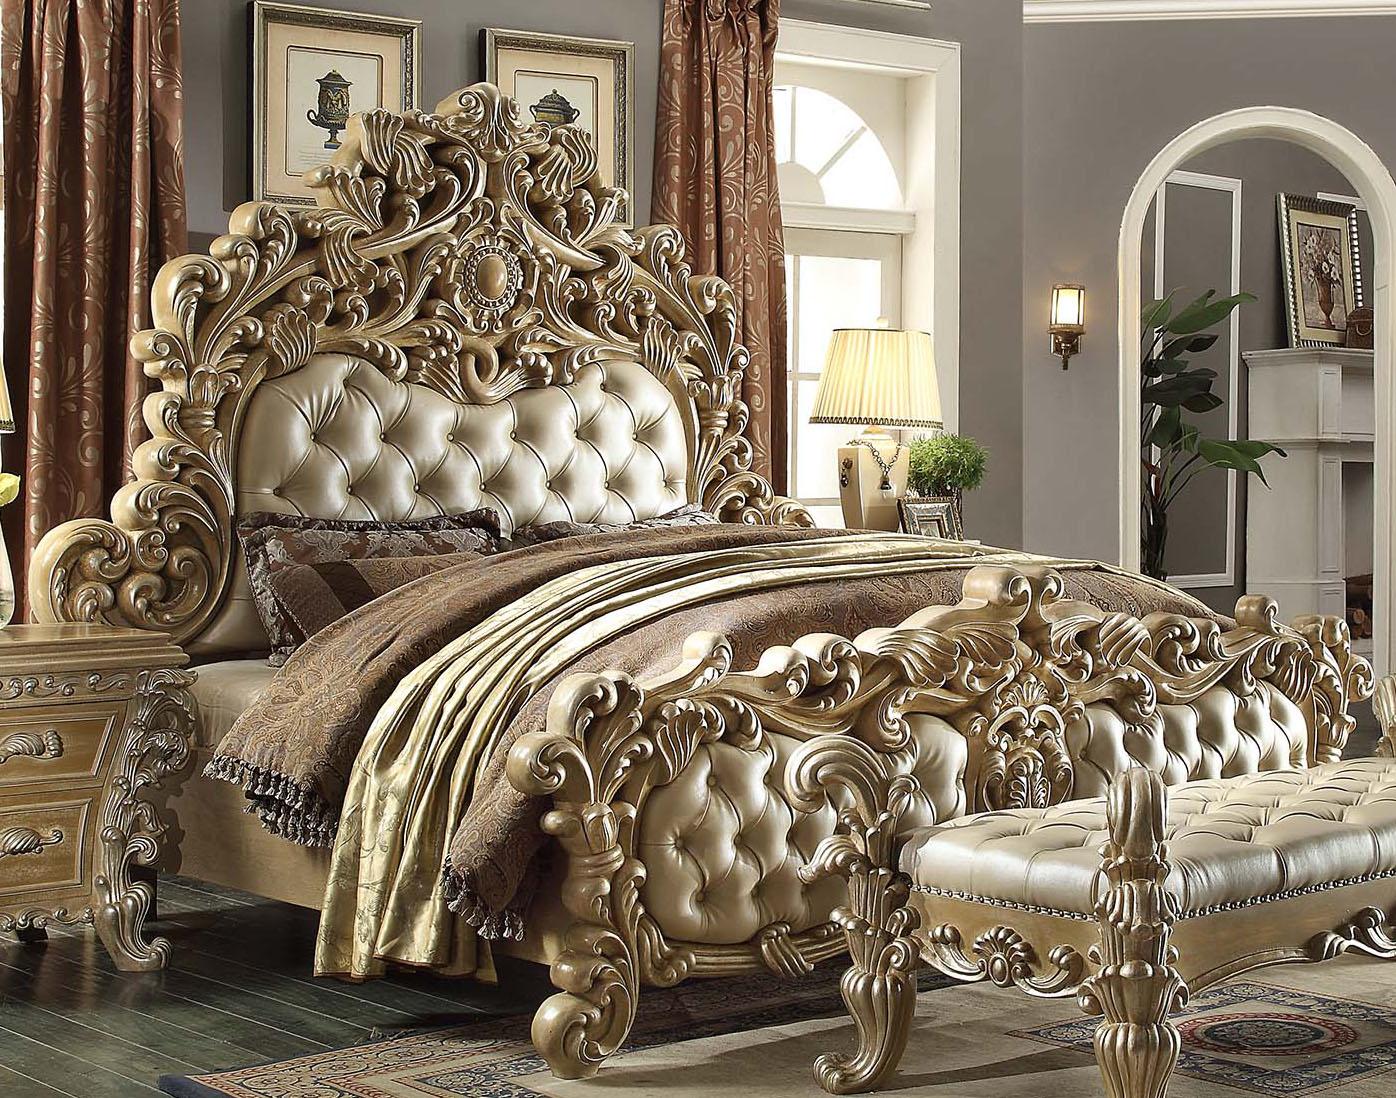 

    
Pickle Frost/Antique Silver CAL King Bedroom Set 3Pcs Traditional Homey Design HD-7012
